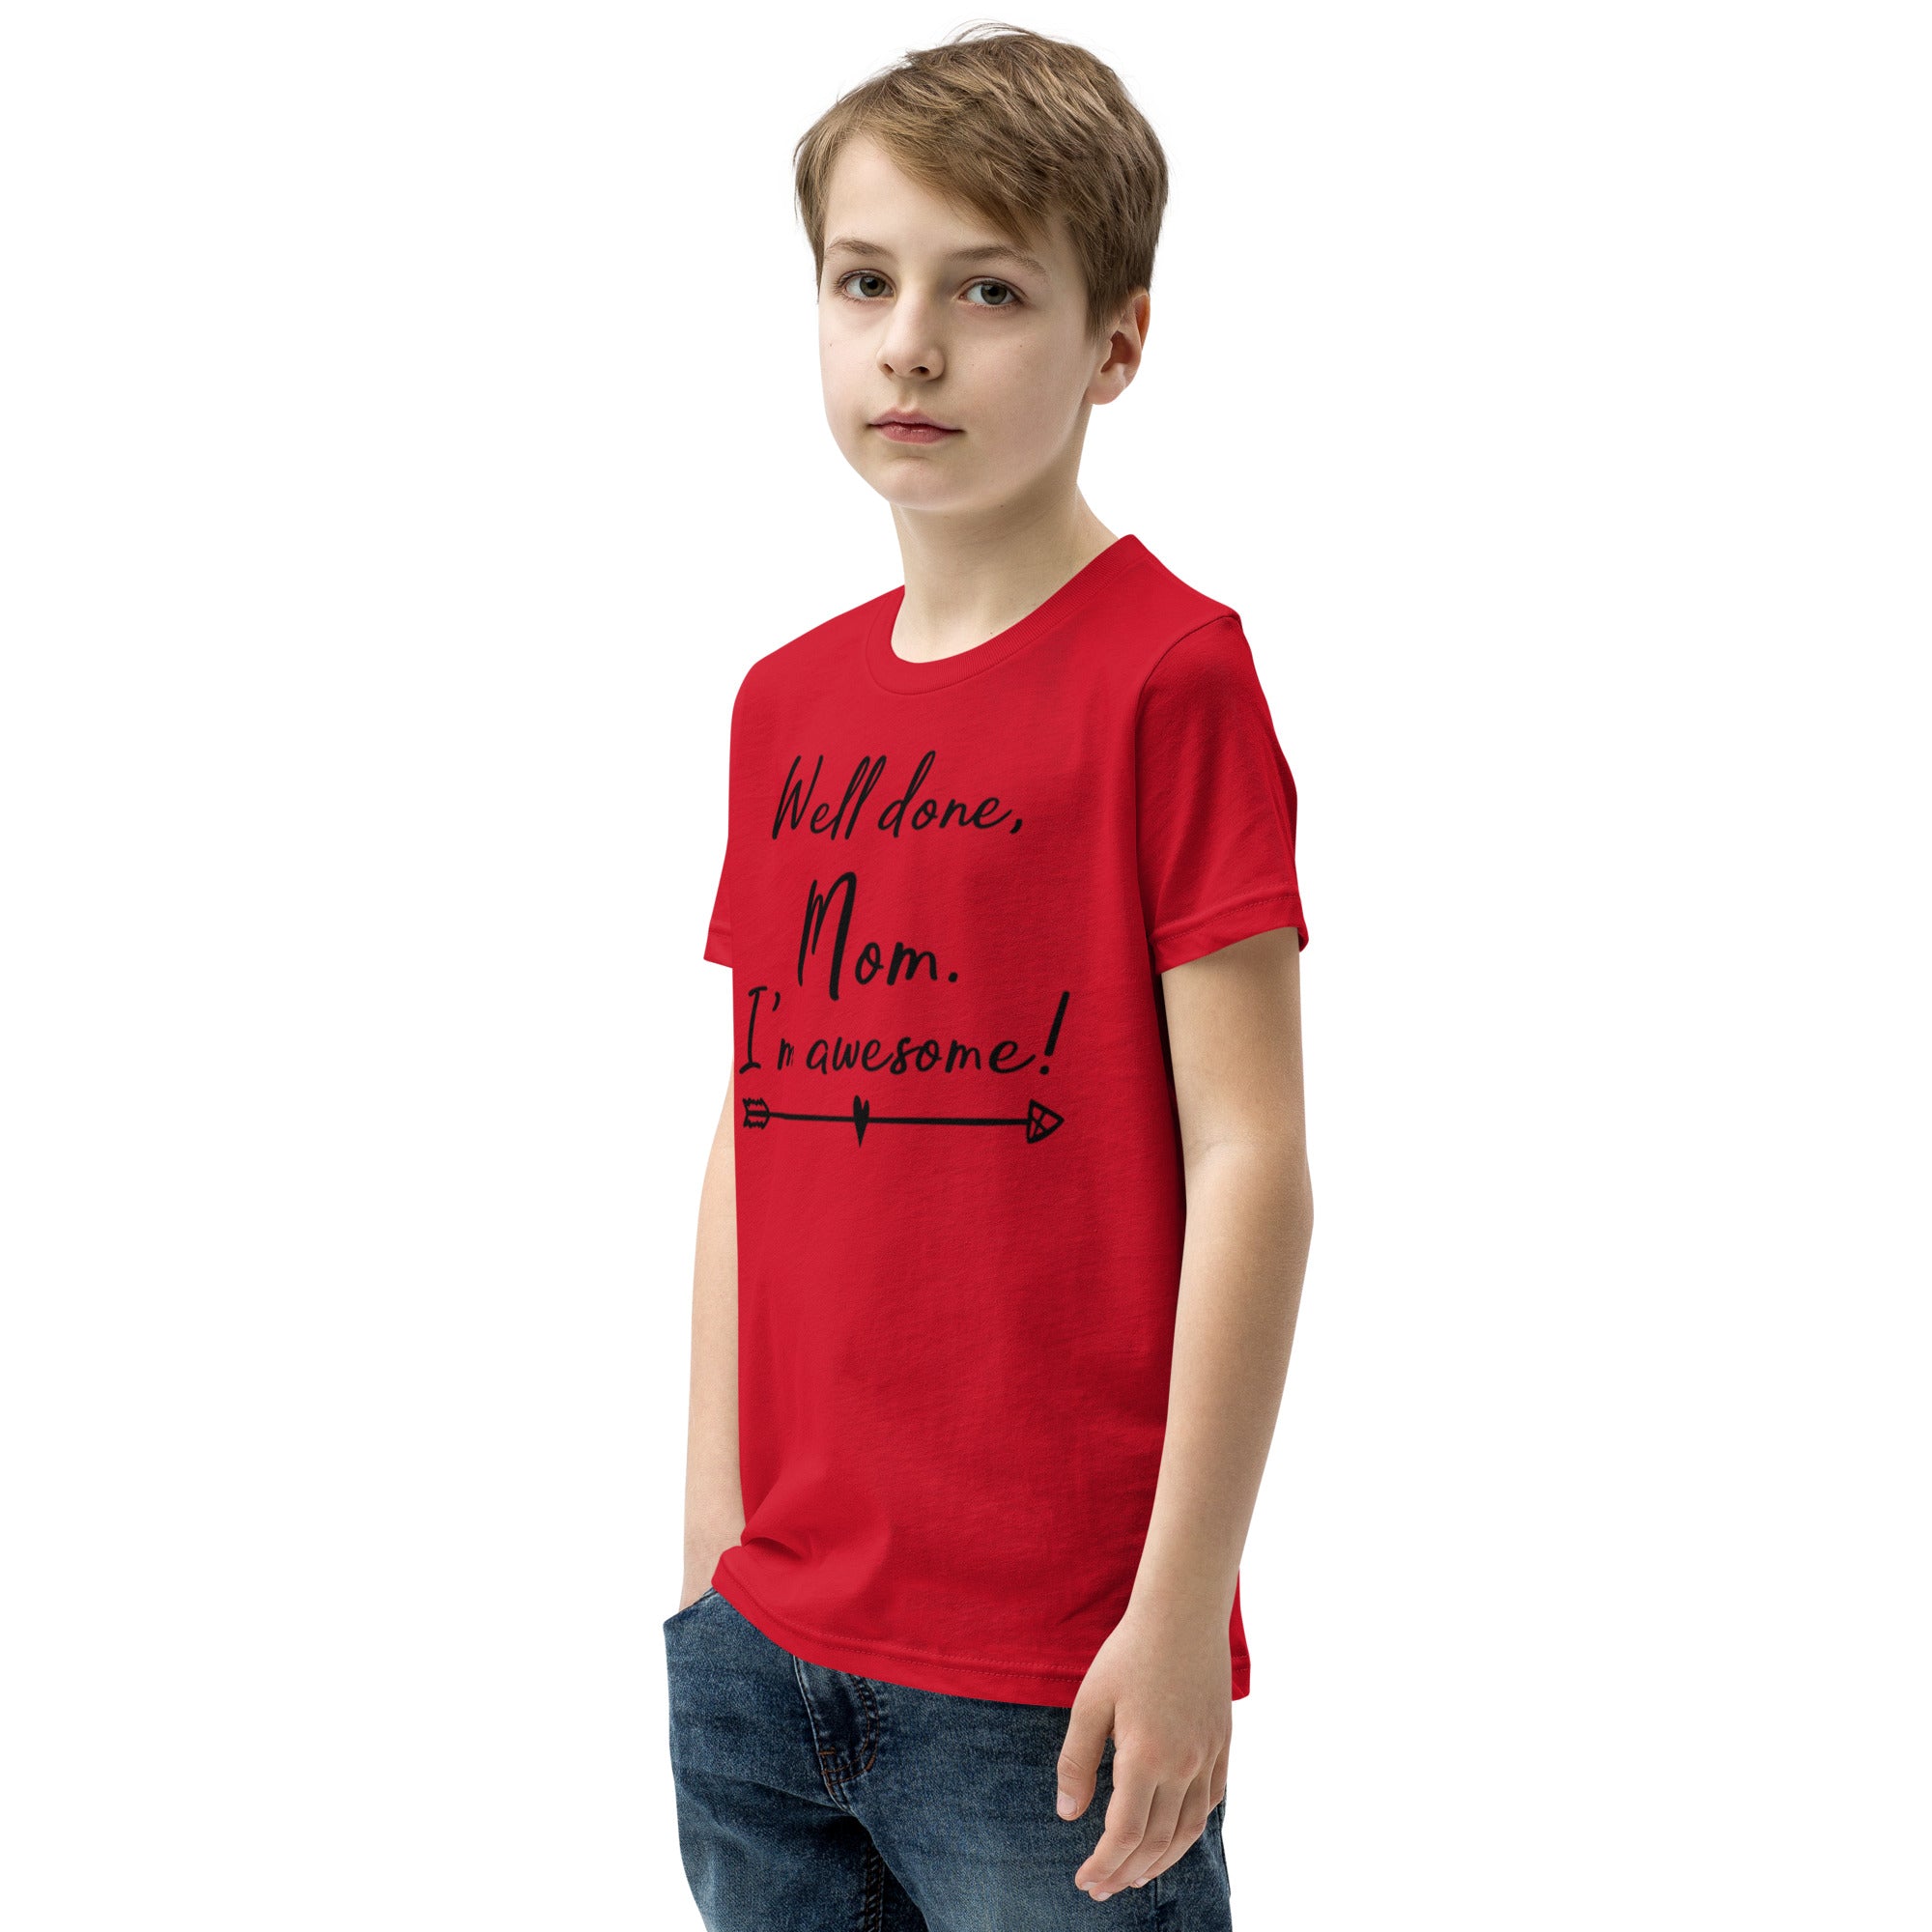 Youth Short Sleeve T-Shirt, Well Done Mom, Back to School, Play T shirt gift